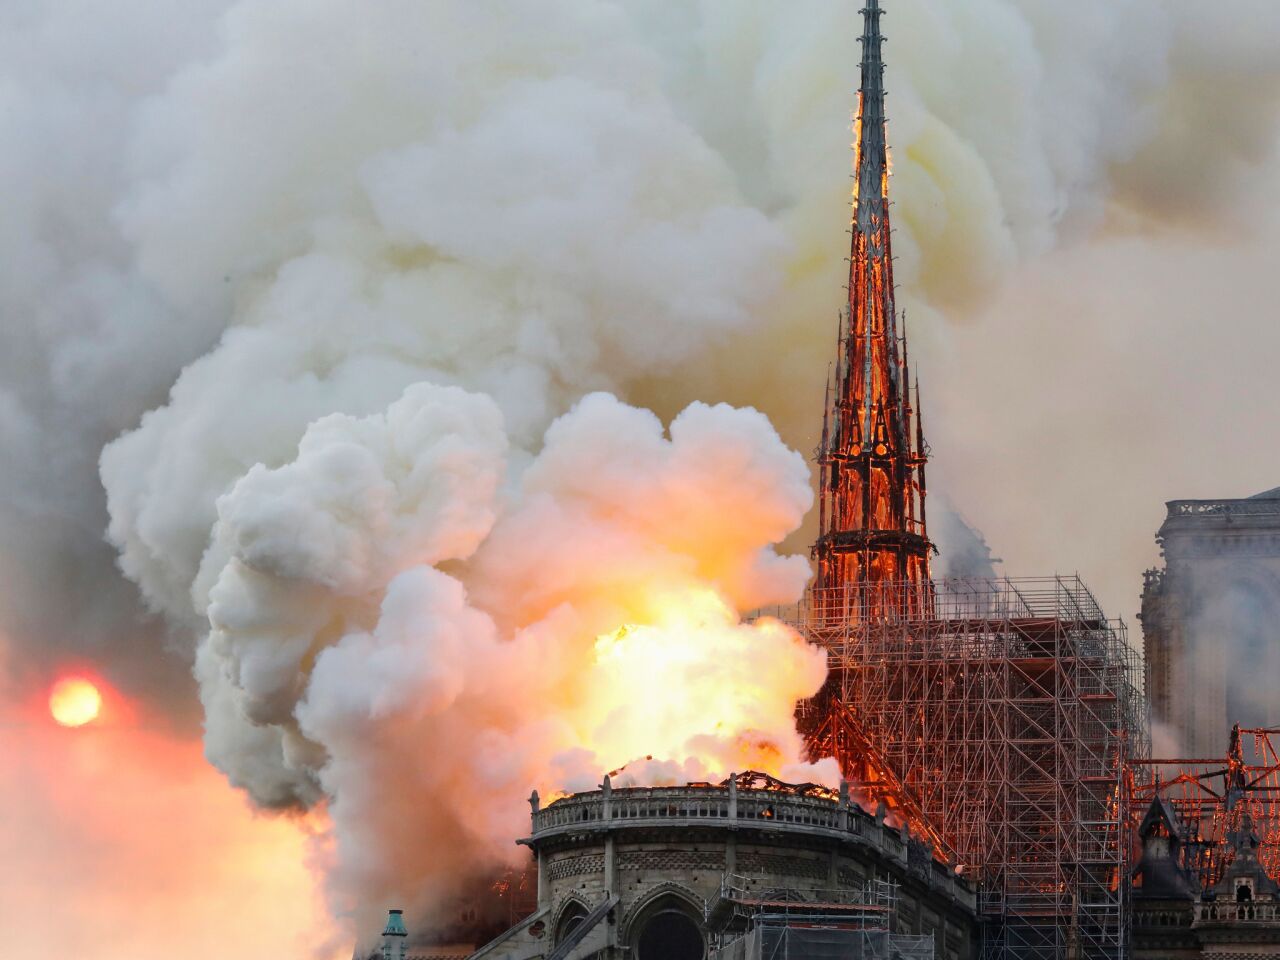 Smoke and flames rise from a fire at the landmark Notre Dame Cathedral in central Paris.